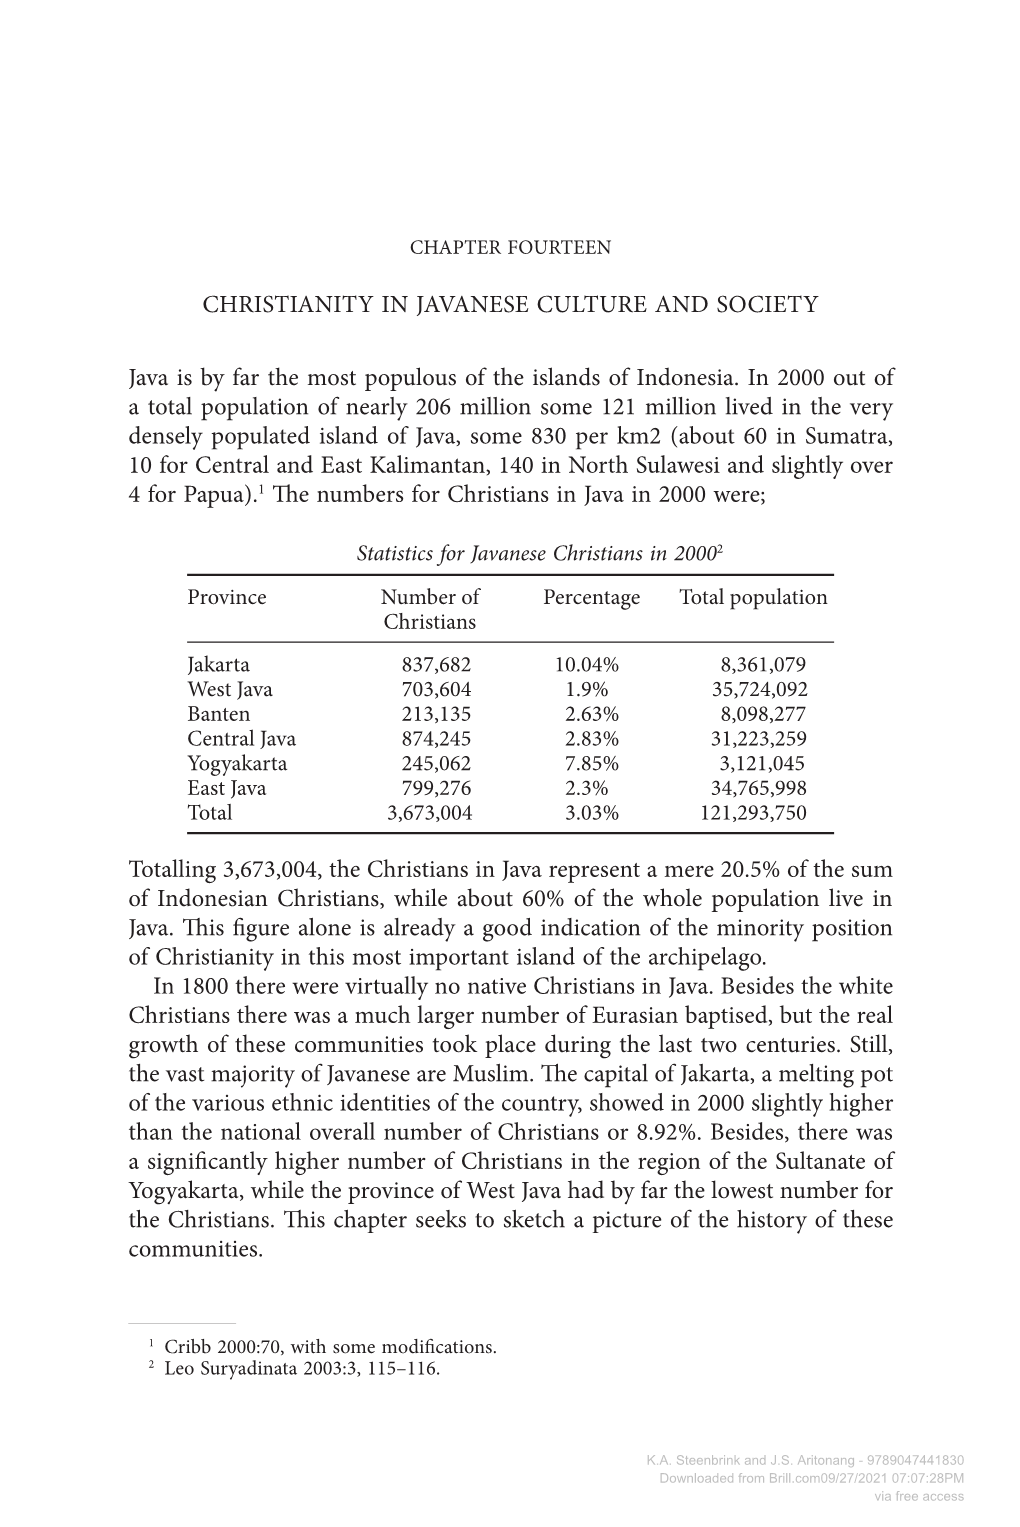 Christianity in Javanese Culture and Society